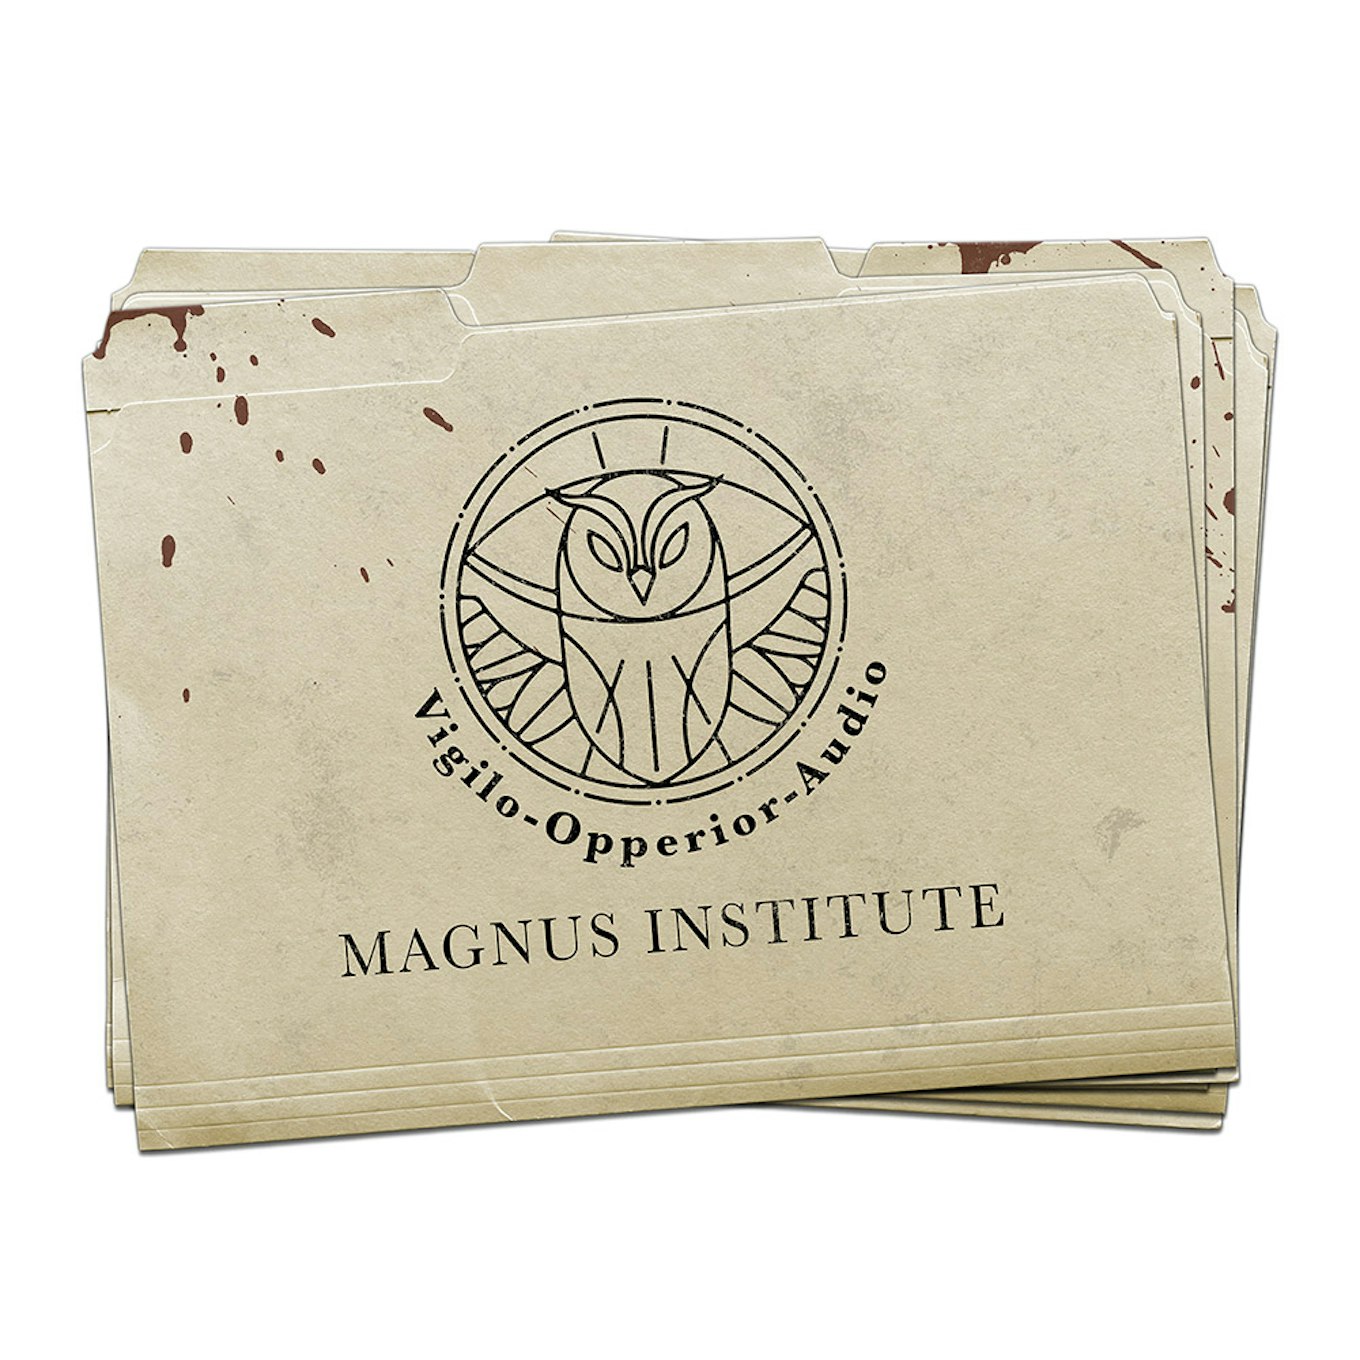 Monte Cook Games on X: Announcing The Magnus Archives RPG, soon on  BackerKit: 📖 Hundreds of pages of suspense! 👻 Delve into character  creation, artifacts, & more. 🎲 The Cypher System, now